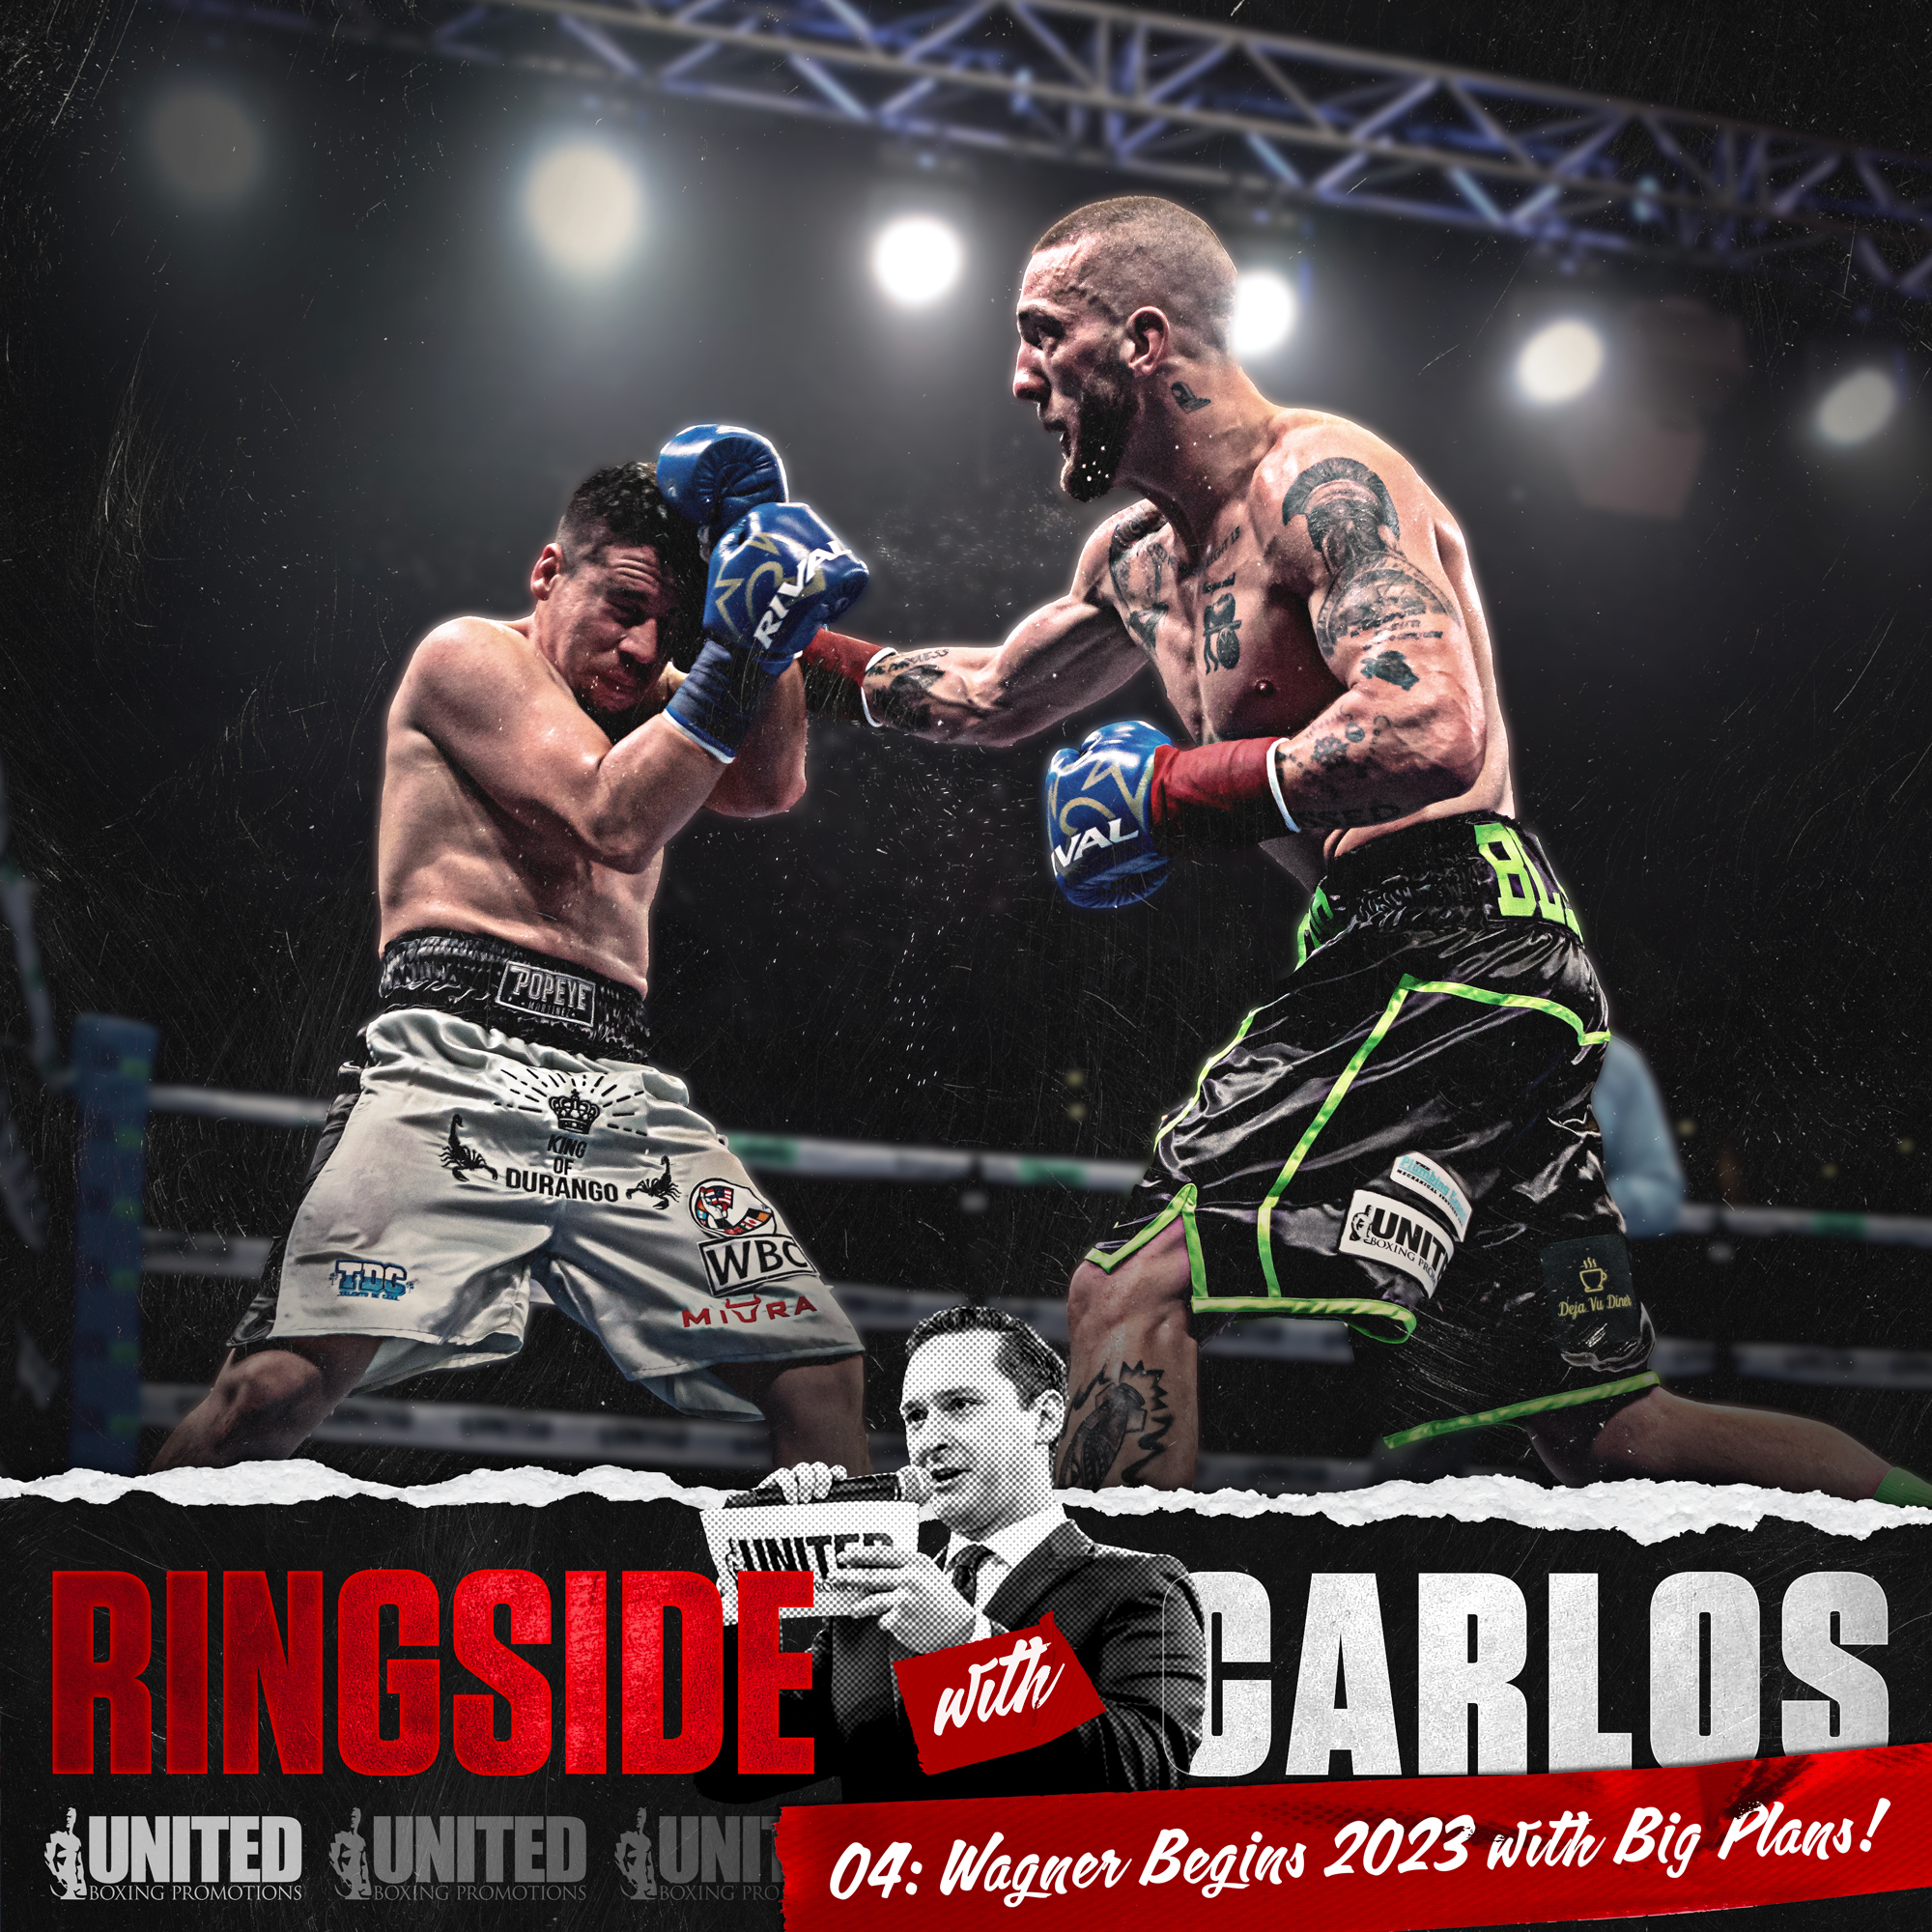 RINGSIDE WITH CARLOS 04: JOSH WAGNER